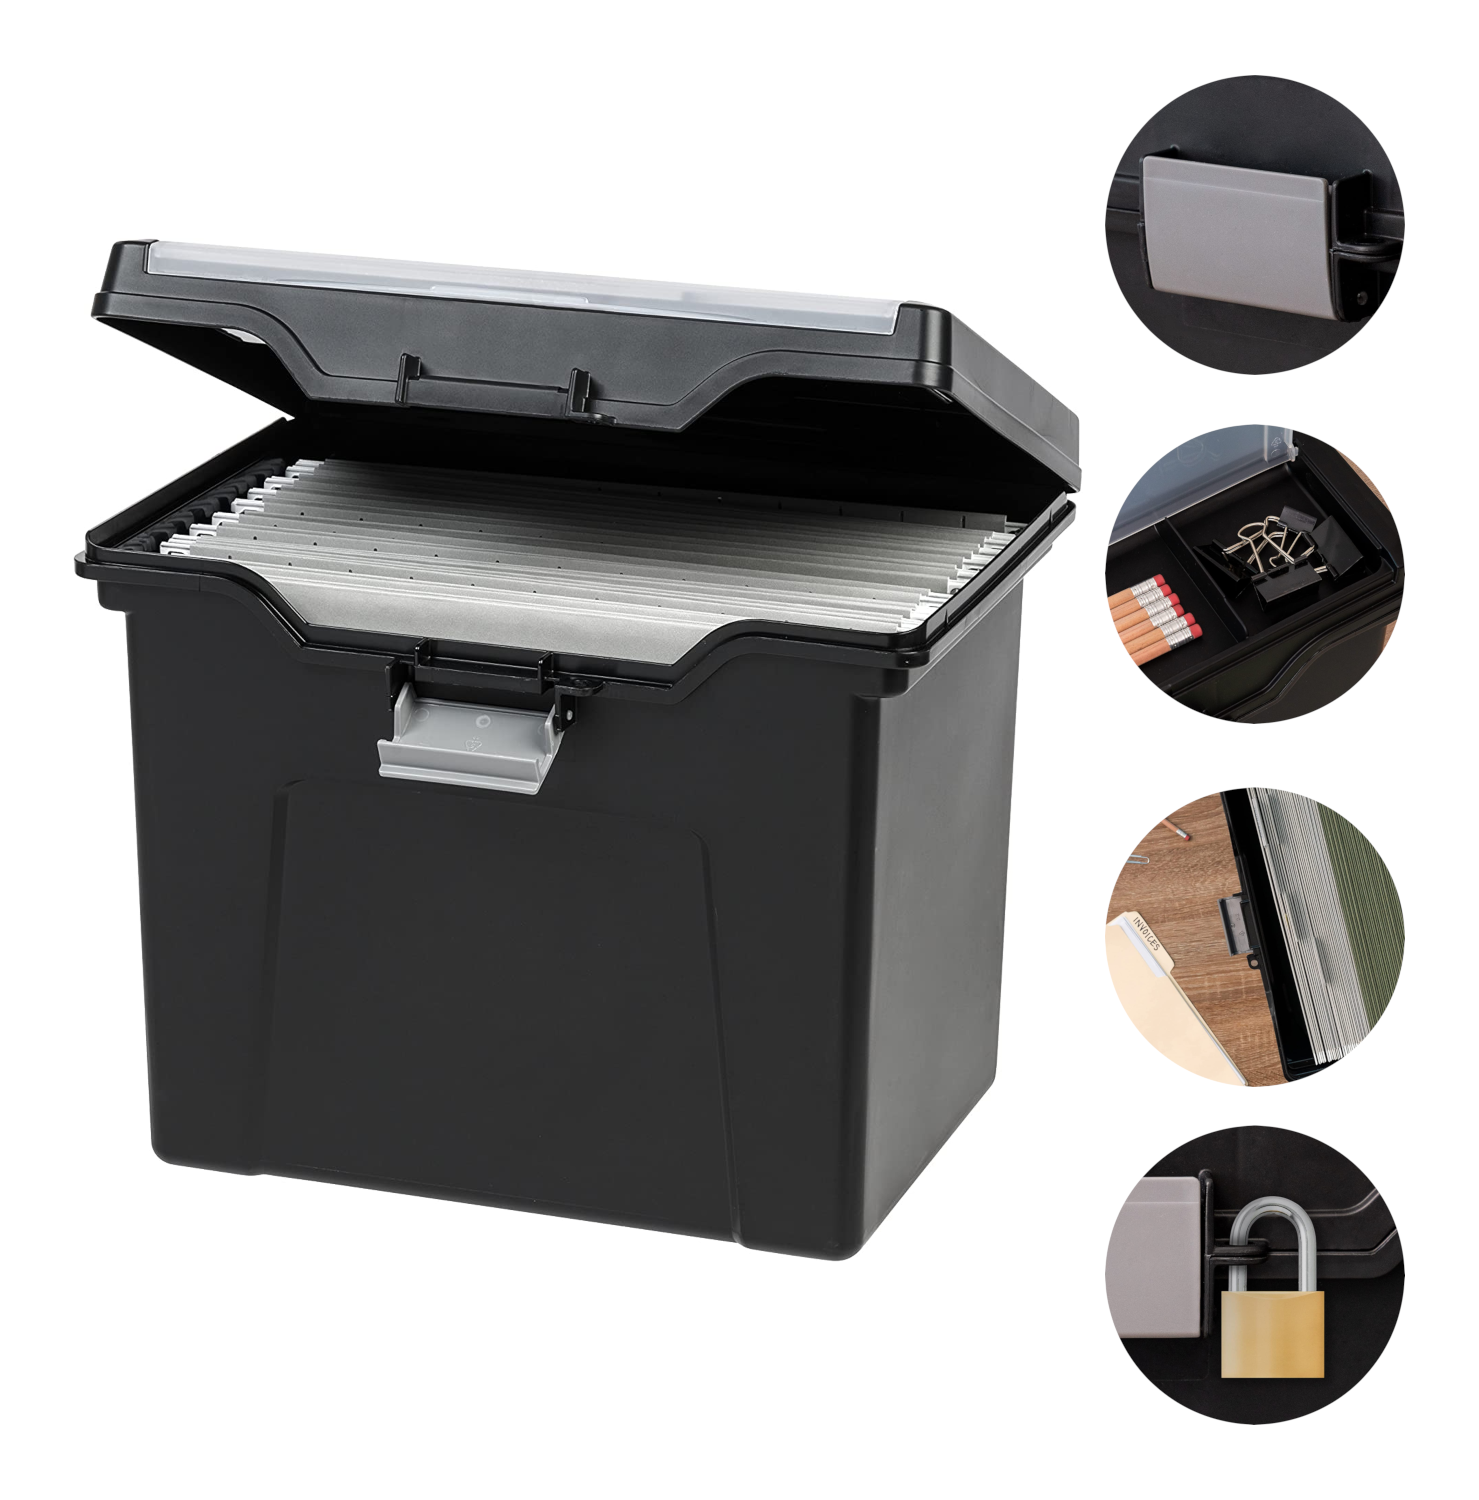 Portable Letter-Sized File Storage Box with Organizer Lid Compartment, 2 pack, Business/Personal Doc